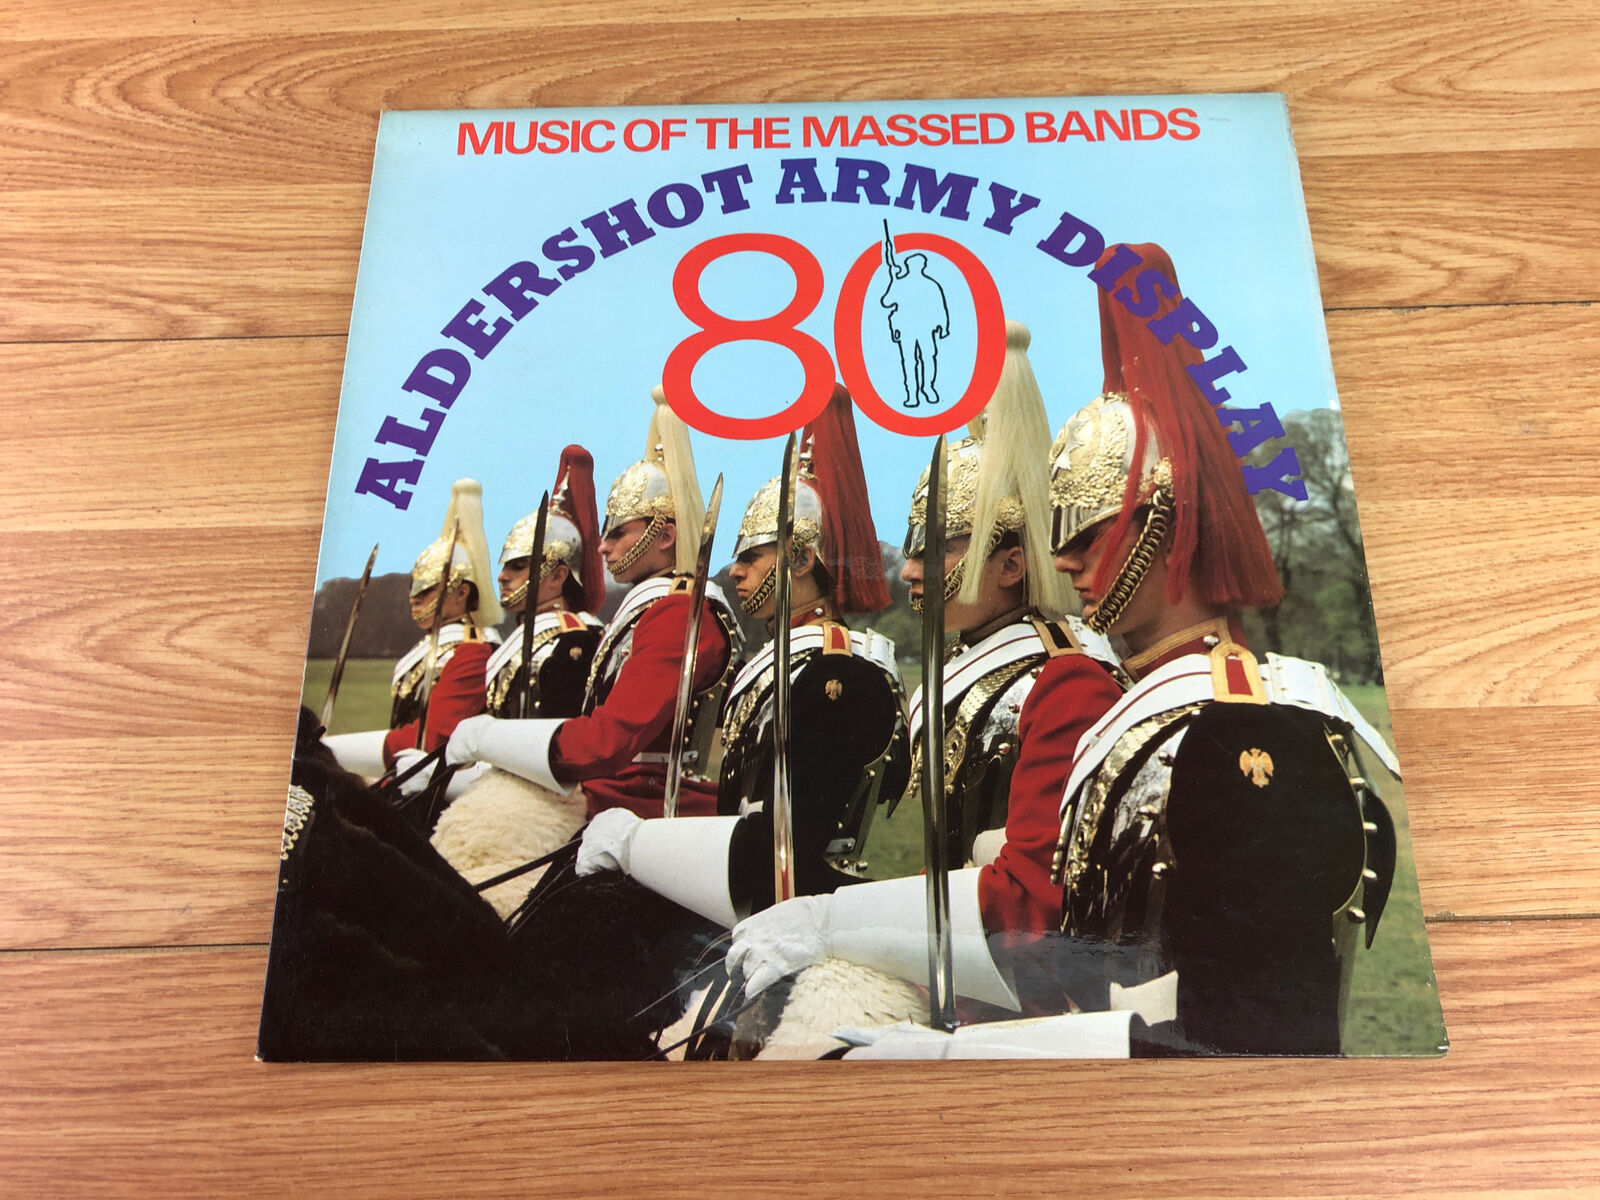 Music Of The Massed Bands Aldershot Army Display 80 Vinyl Record 